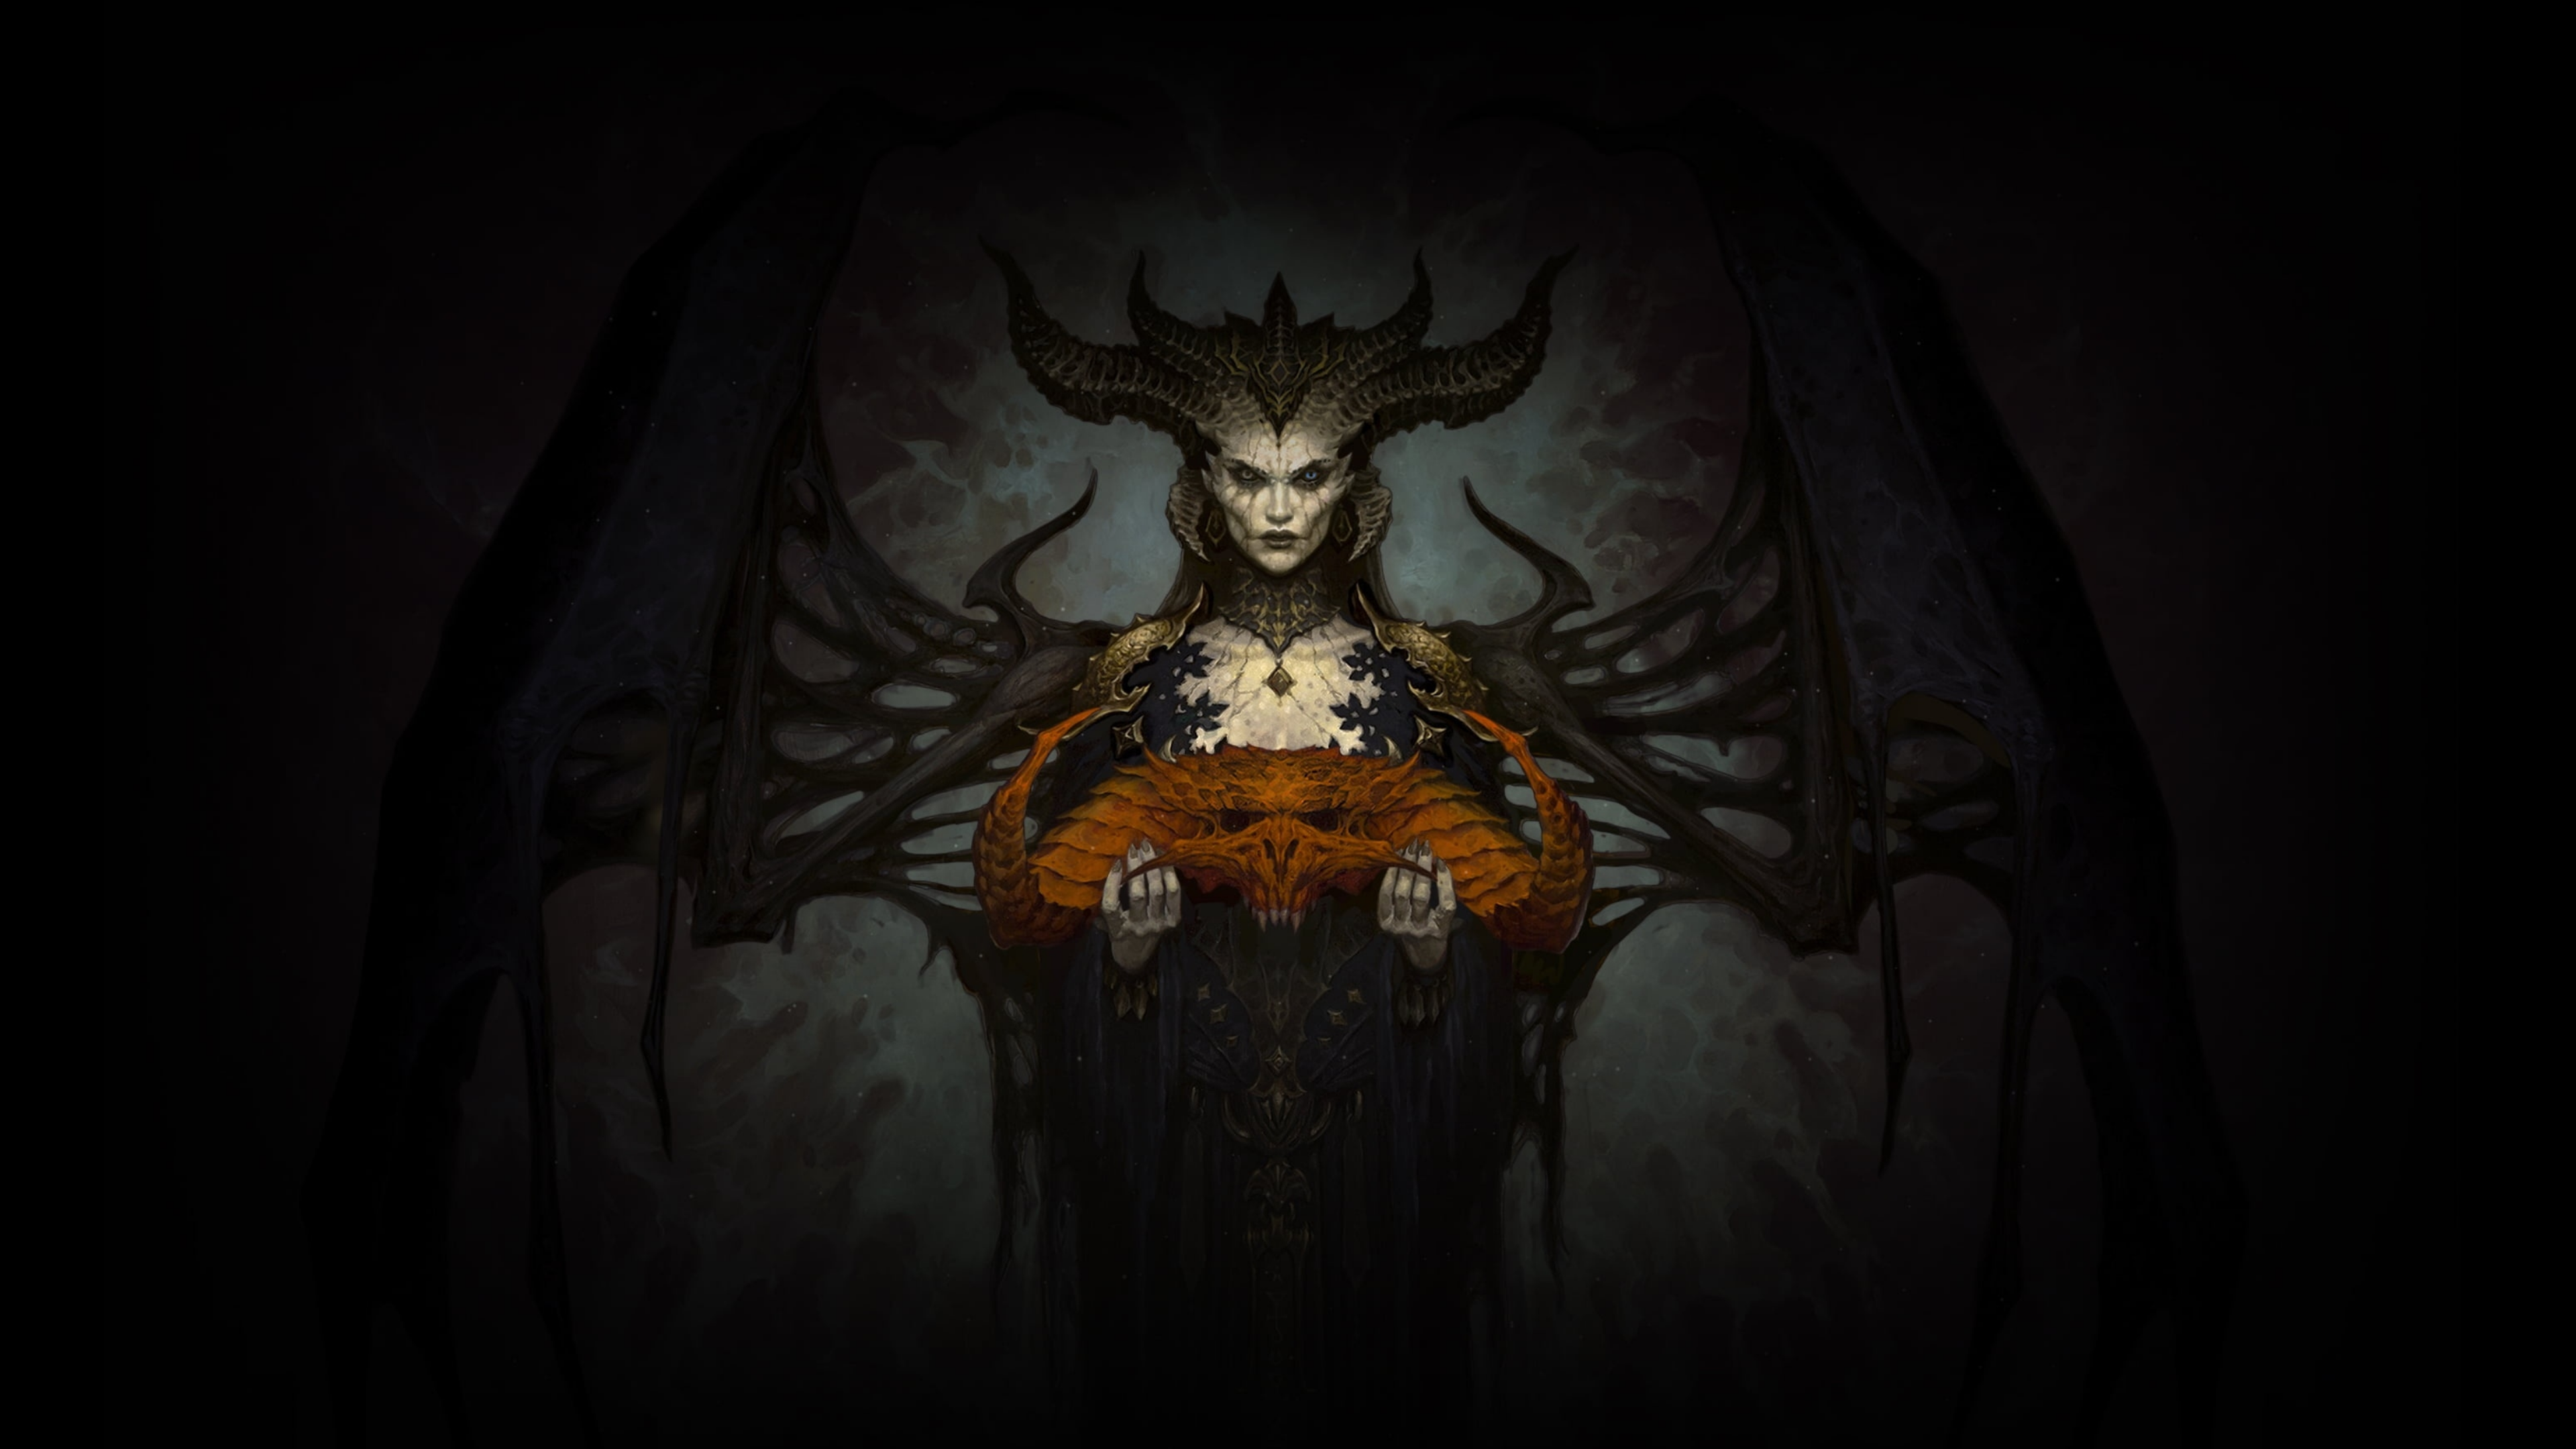 Diablo Iv HD Wallpaper And Background